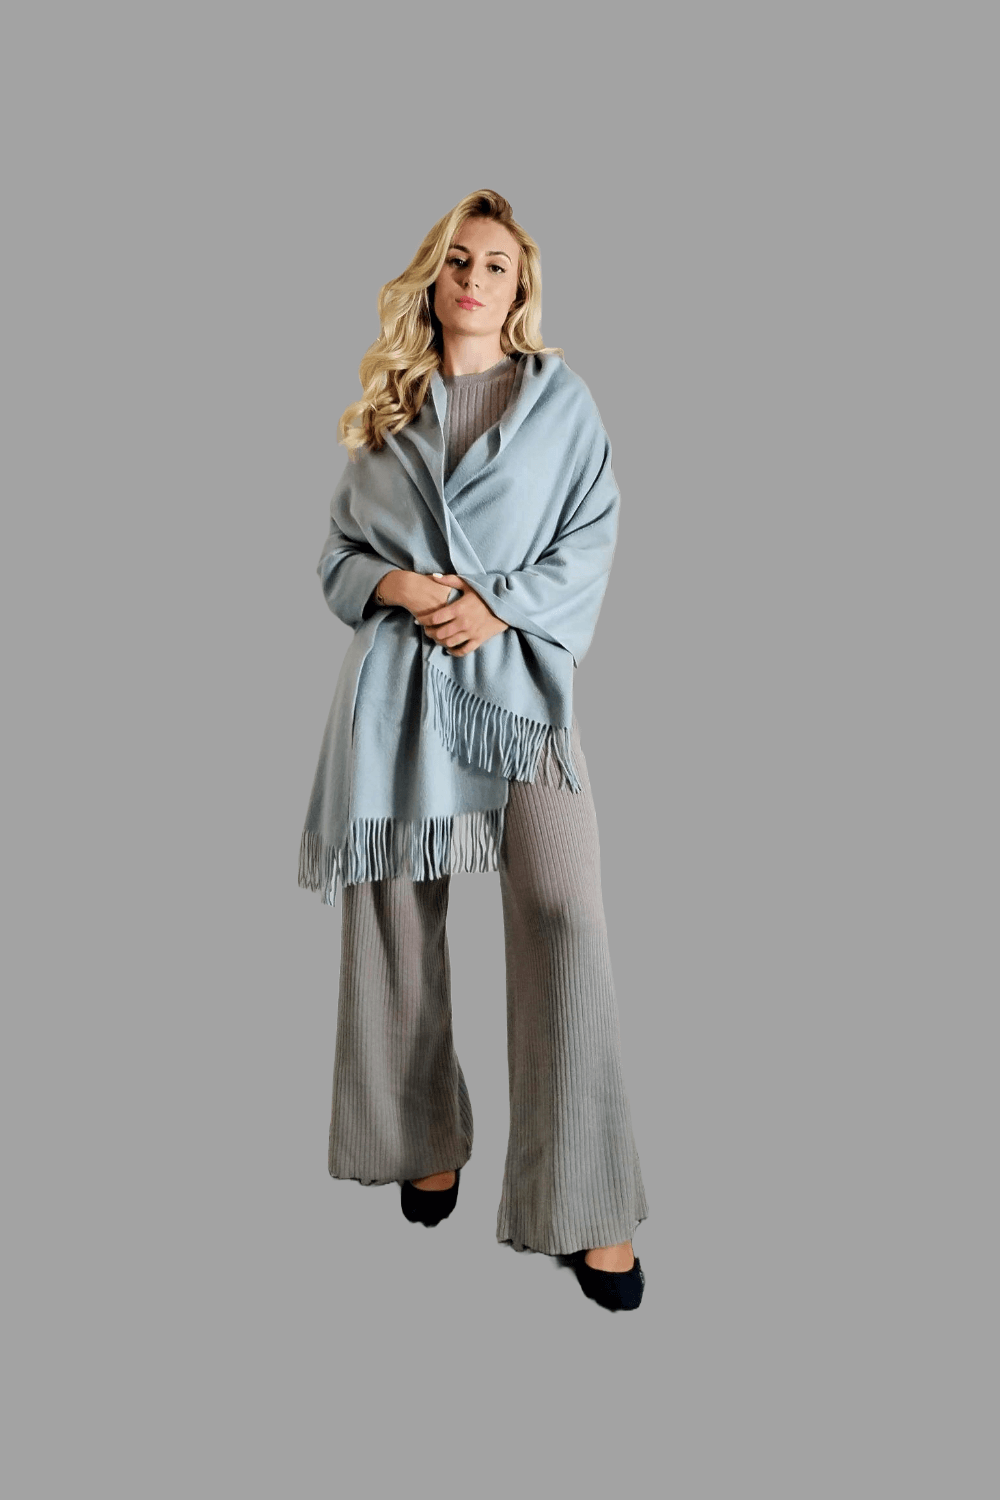 100% Cashmere Shawl in Mint Green